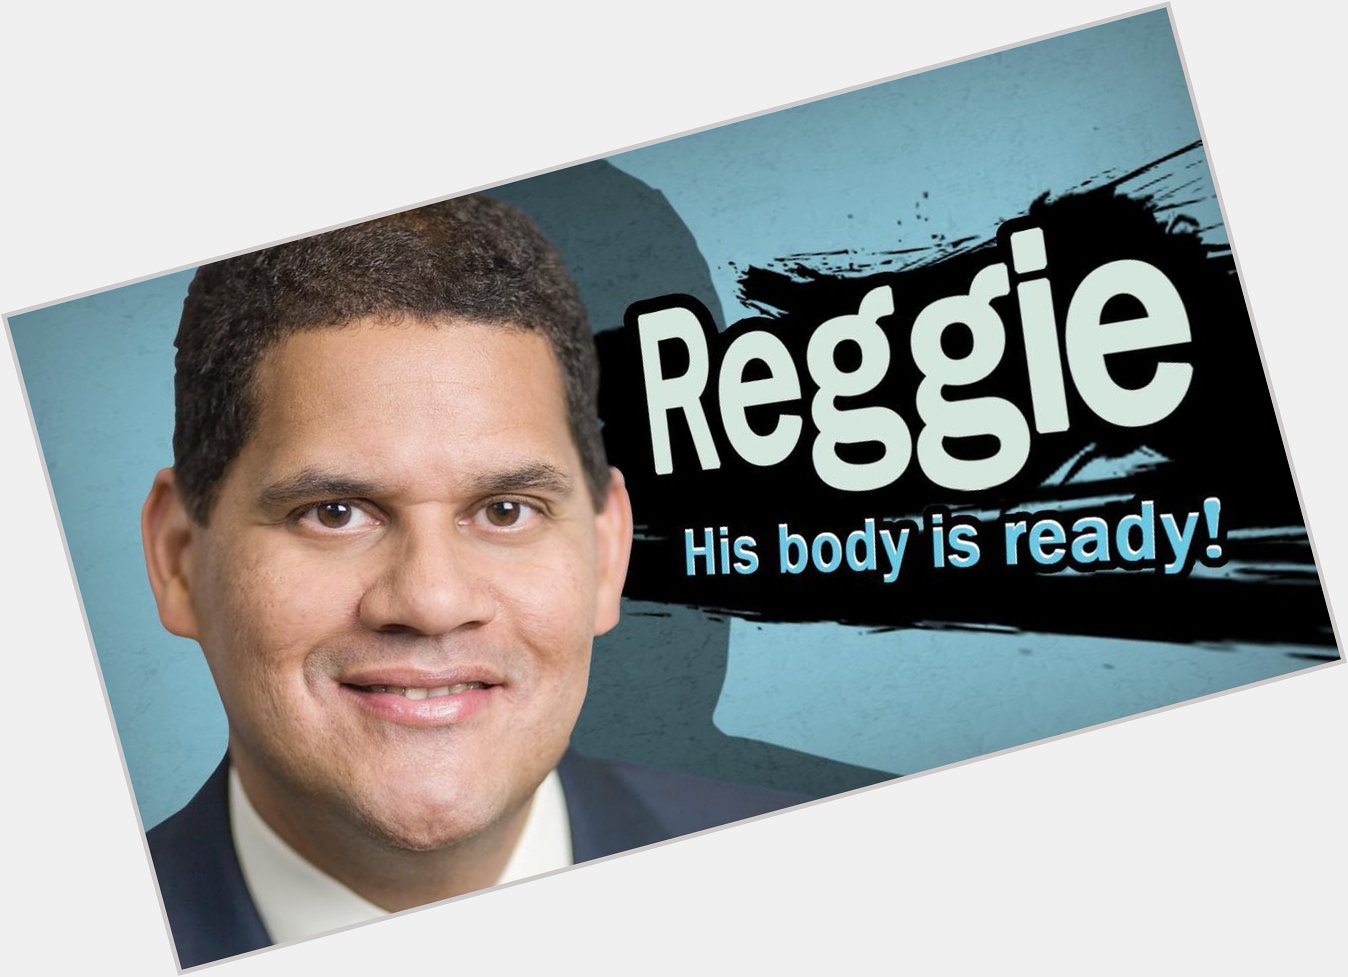 Apparently, it is Reggie Fils-Aime\s 54th birthday today. Happy birthday and may your body always be ready! 